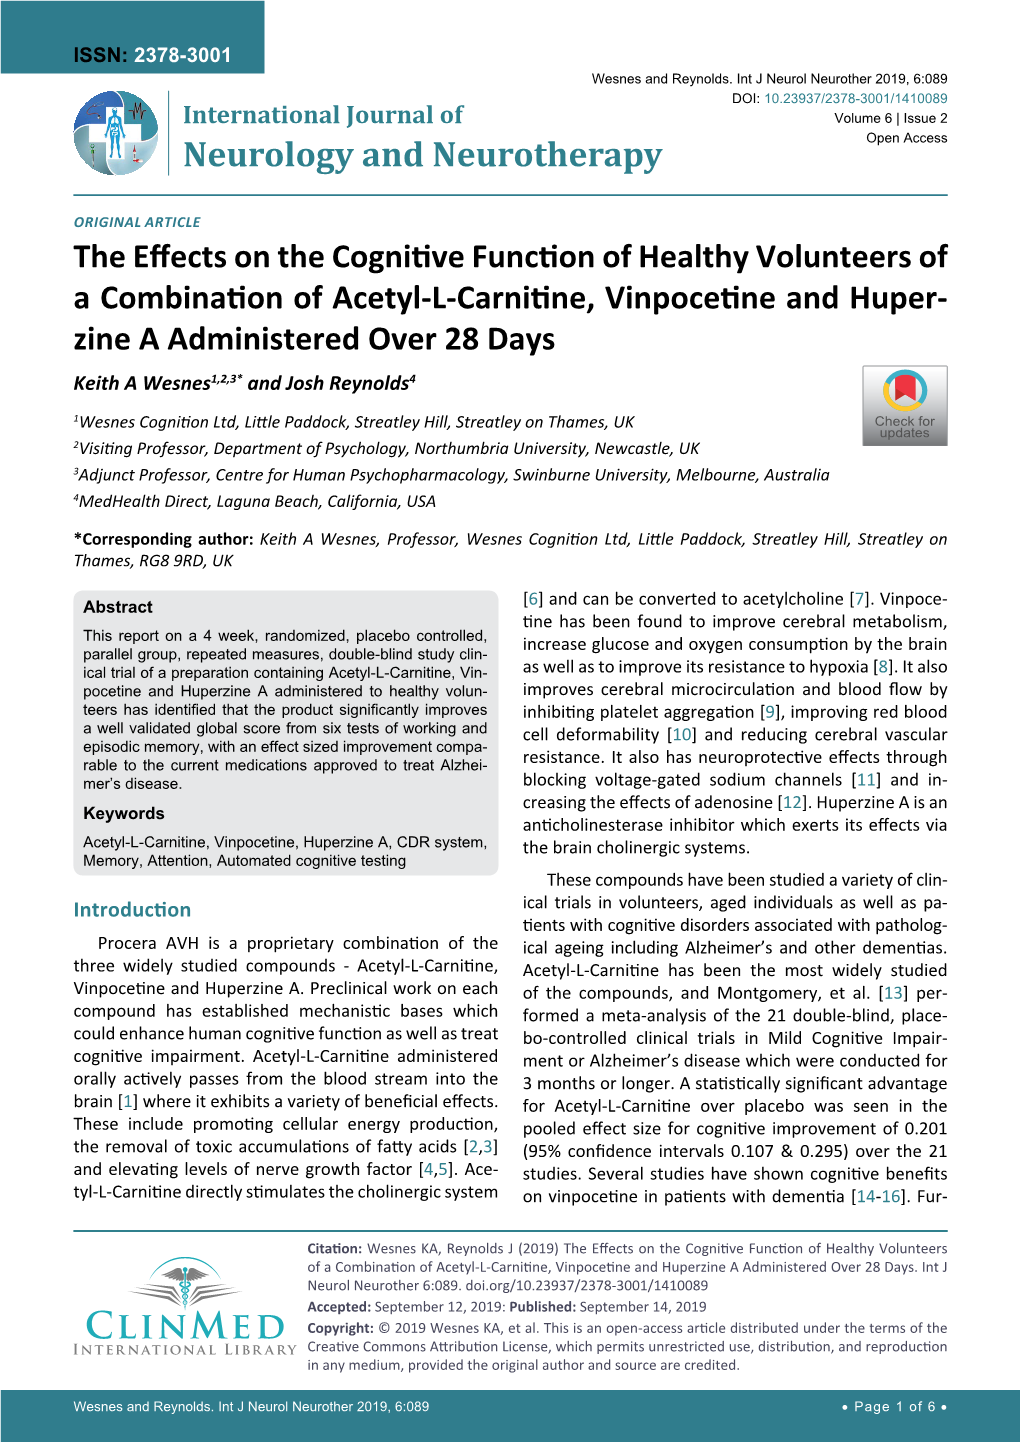 The Effects on the Cognitive Function of Healthy Volunteers of A